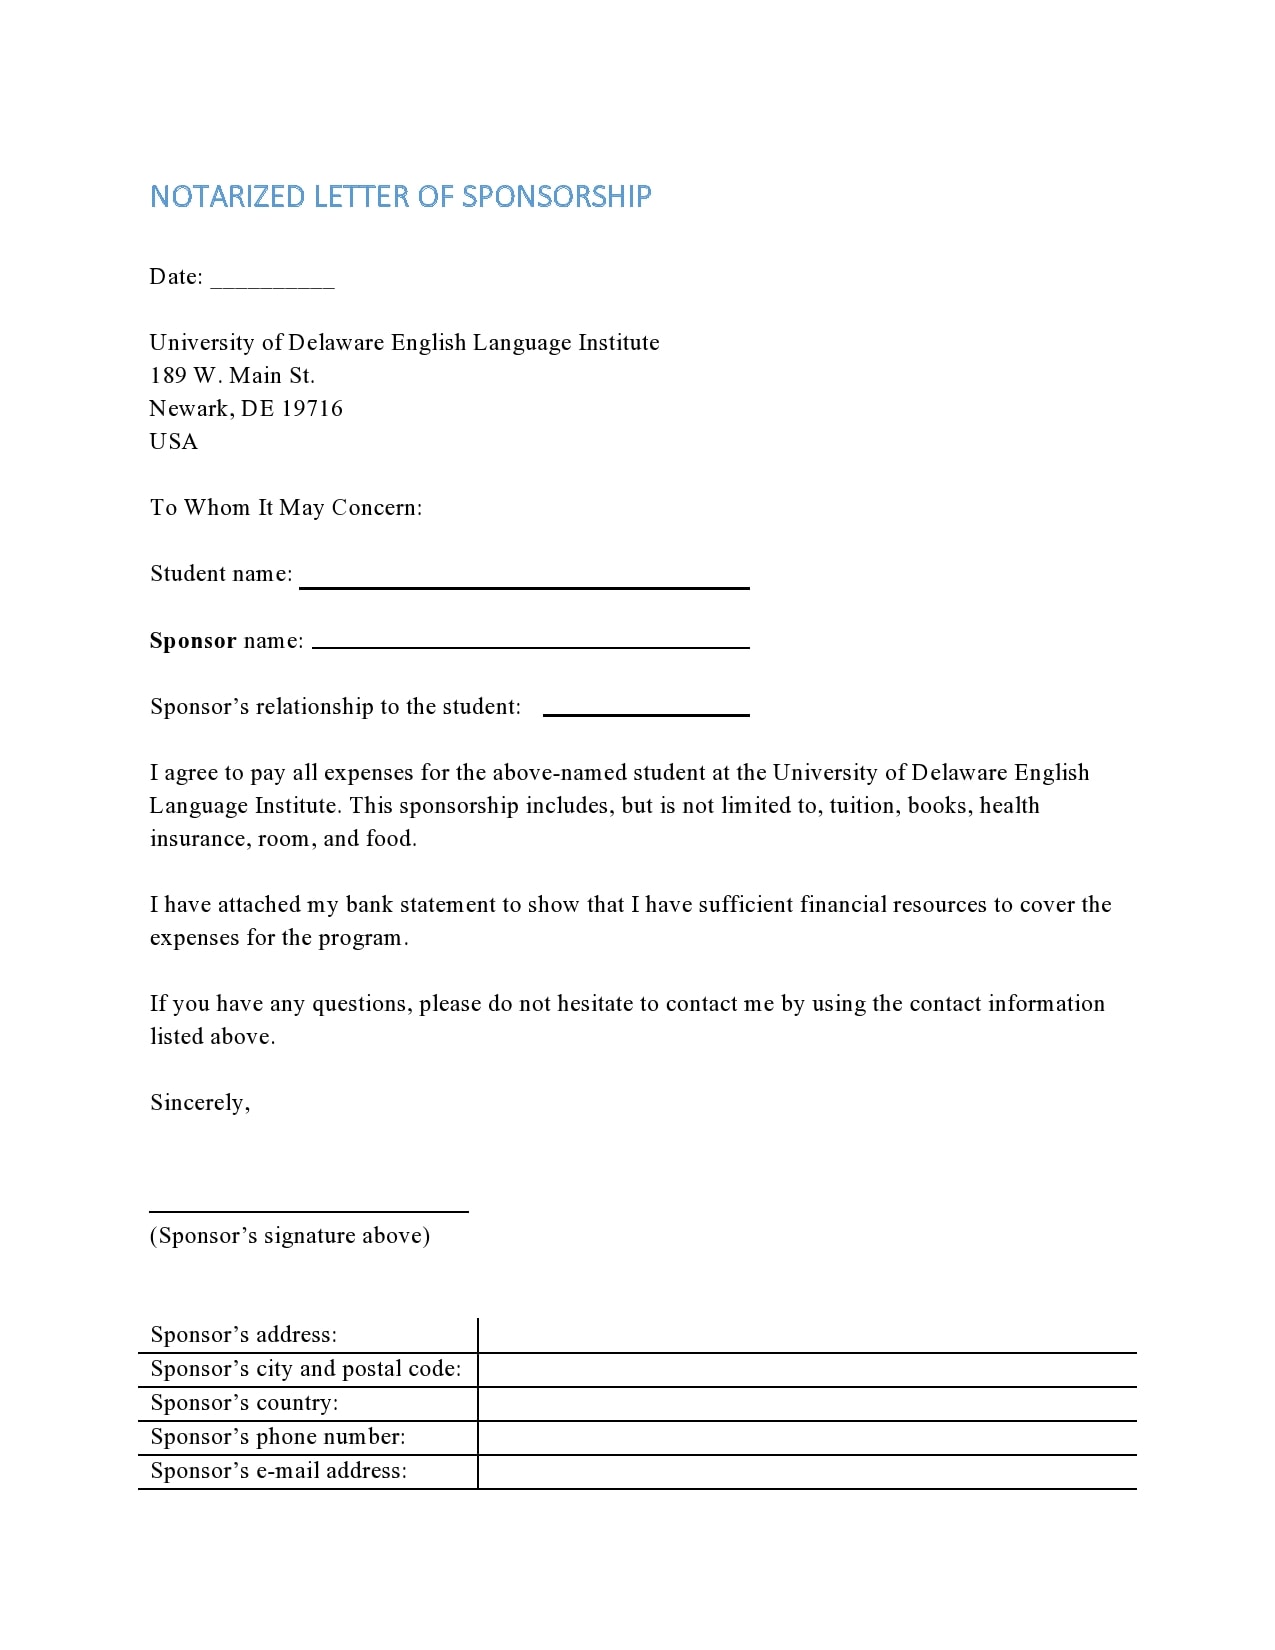 30 Free Notarized Letter Templates Notary Letters TemplateArchive